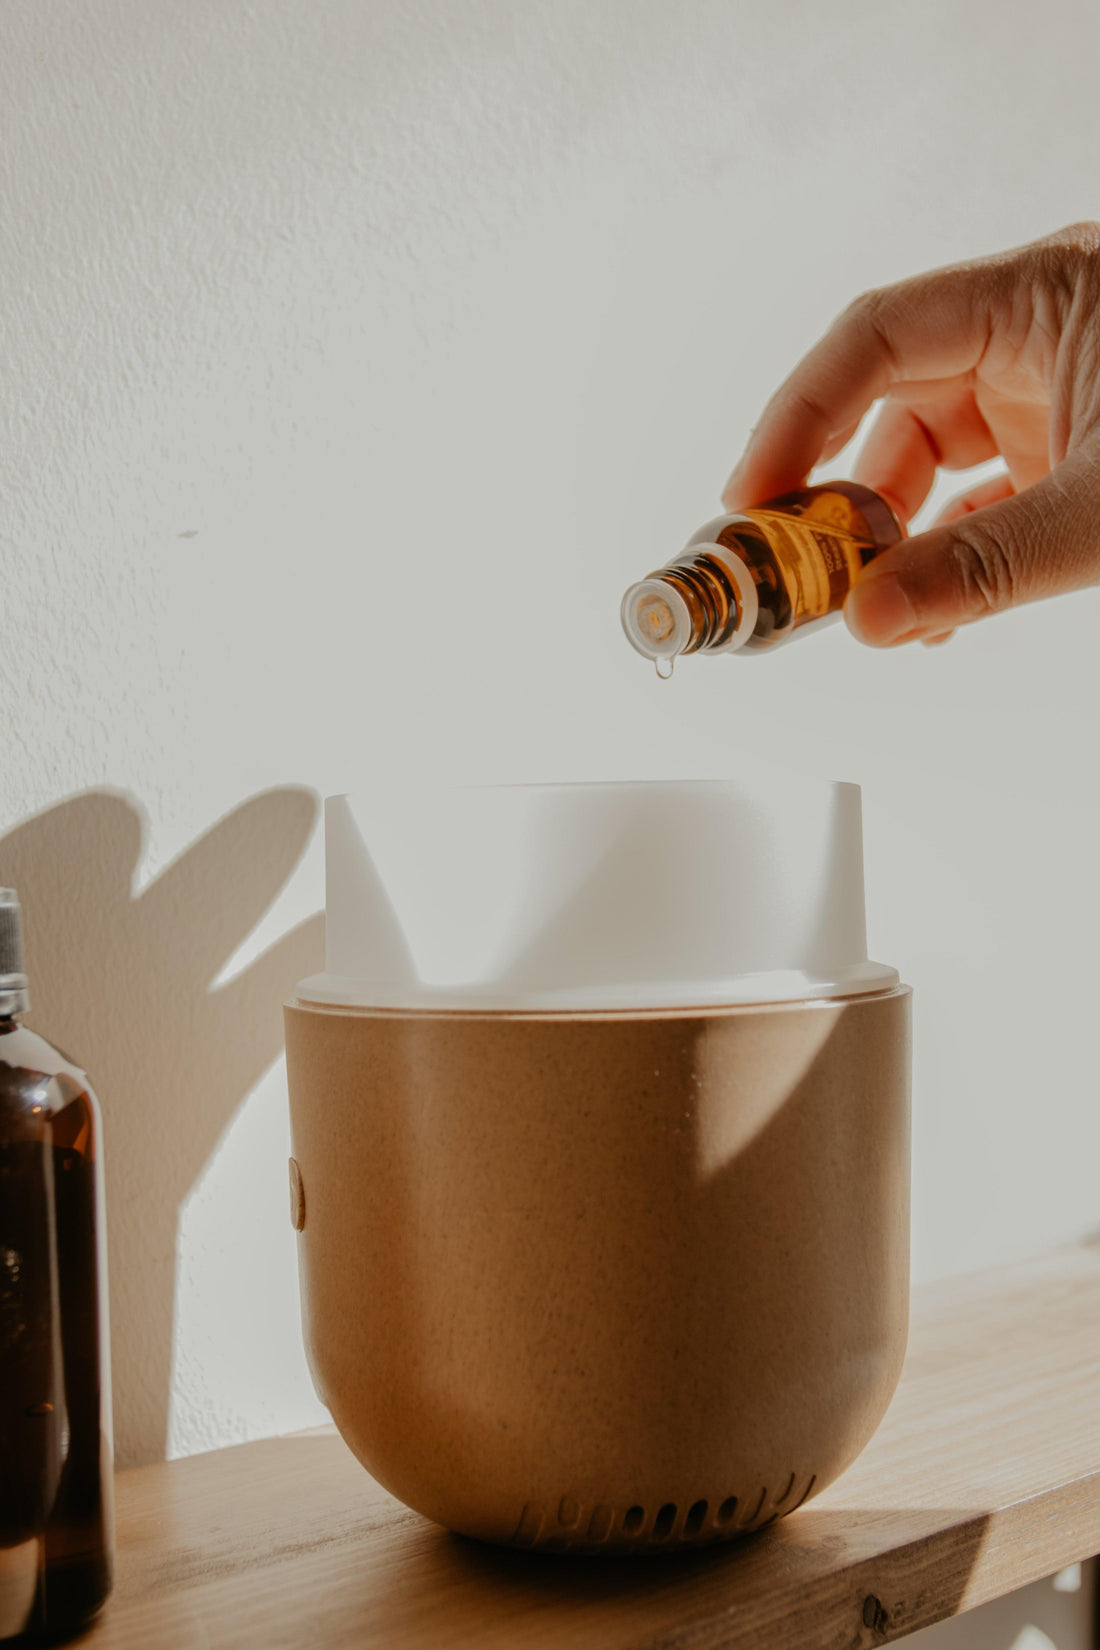 NZ Essential Oils Buying Guide: Which Scent Should I Choose? - Ahuru Candle NZ